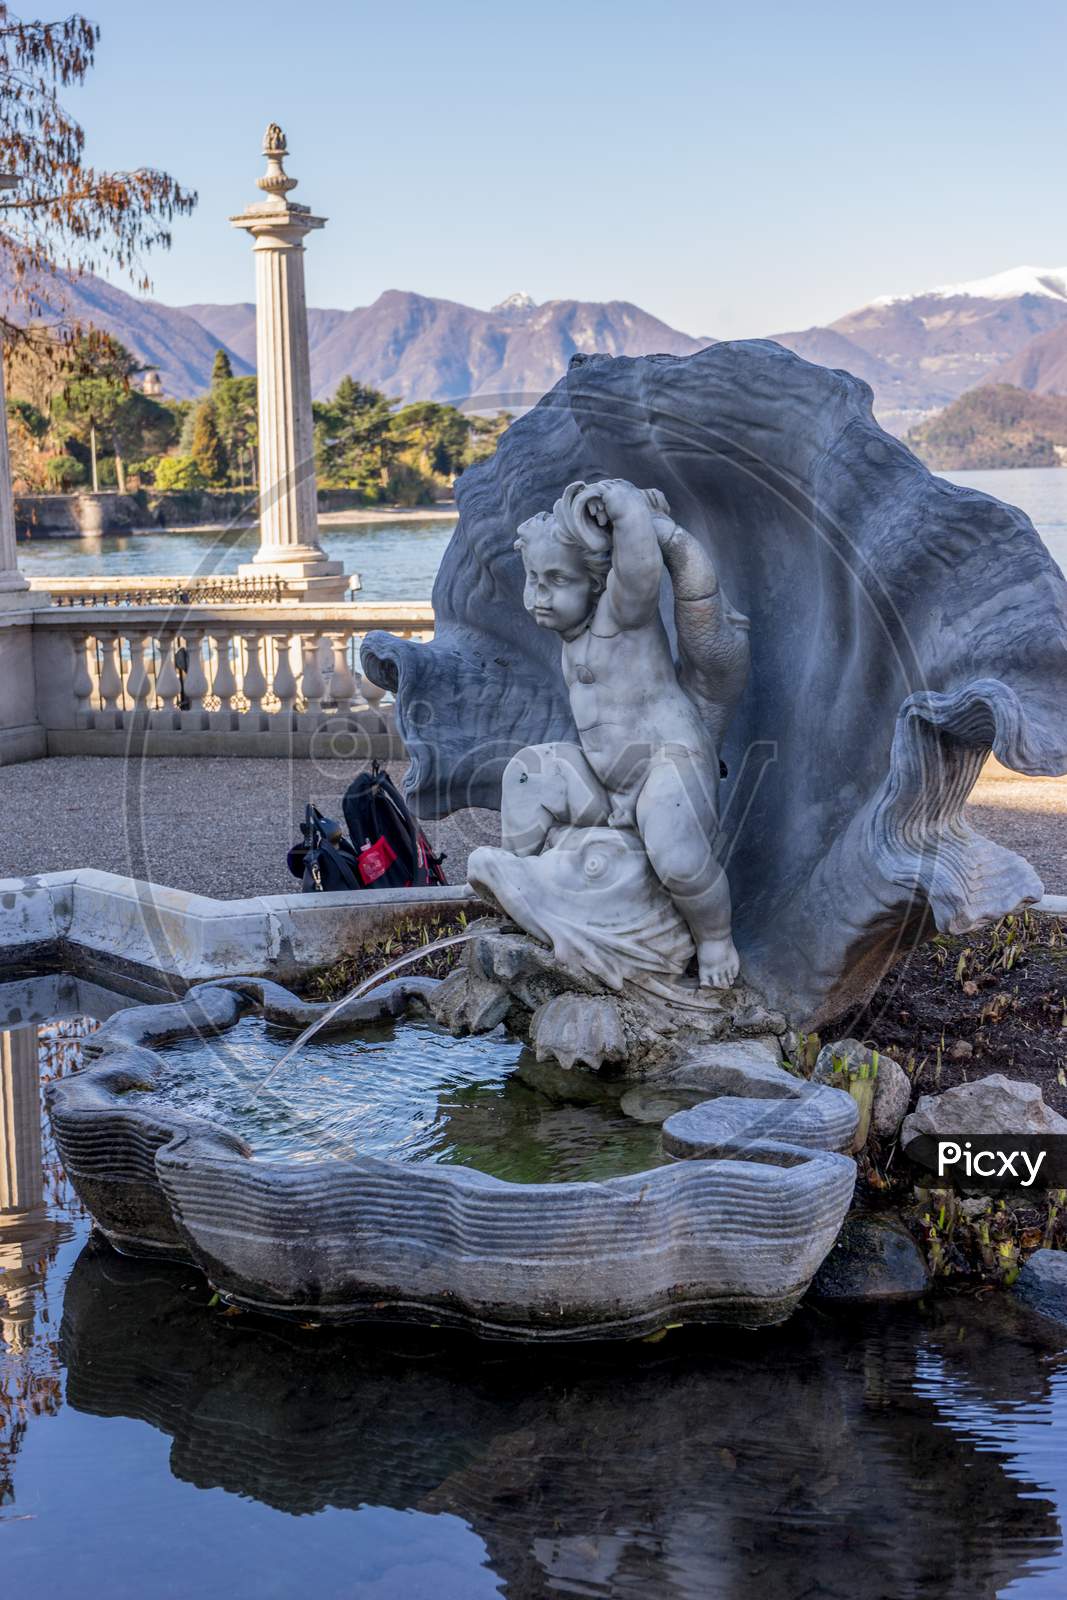 Italy, Bellagio, Lake Como, Abellagio, Italy-April 1, 2018: Water And Lily Fountain At Giardini Di Villa Melzi Group Of Stuffed Animals Sitting Next To A Body Of Water